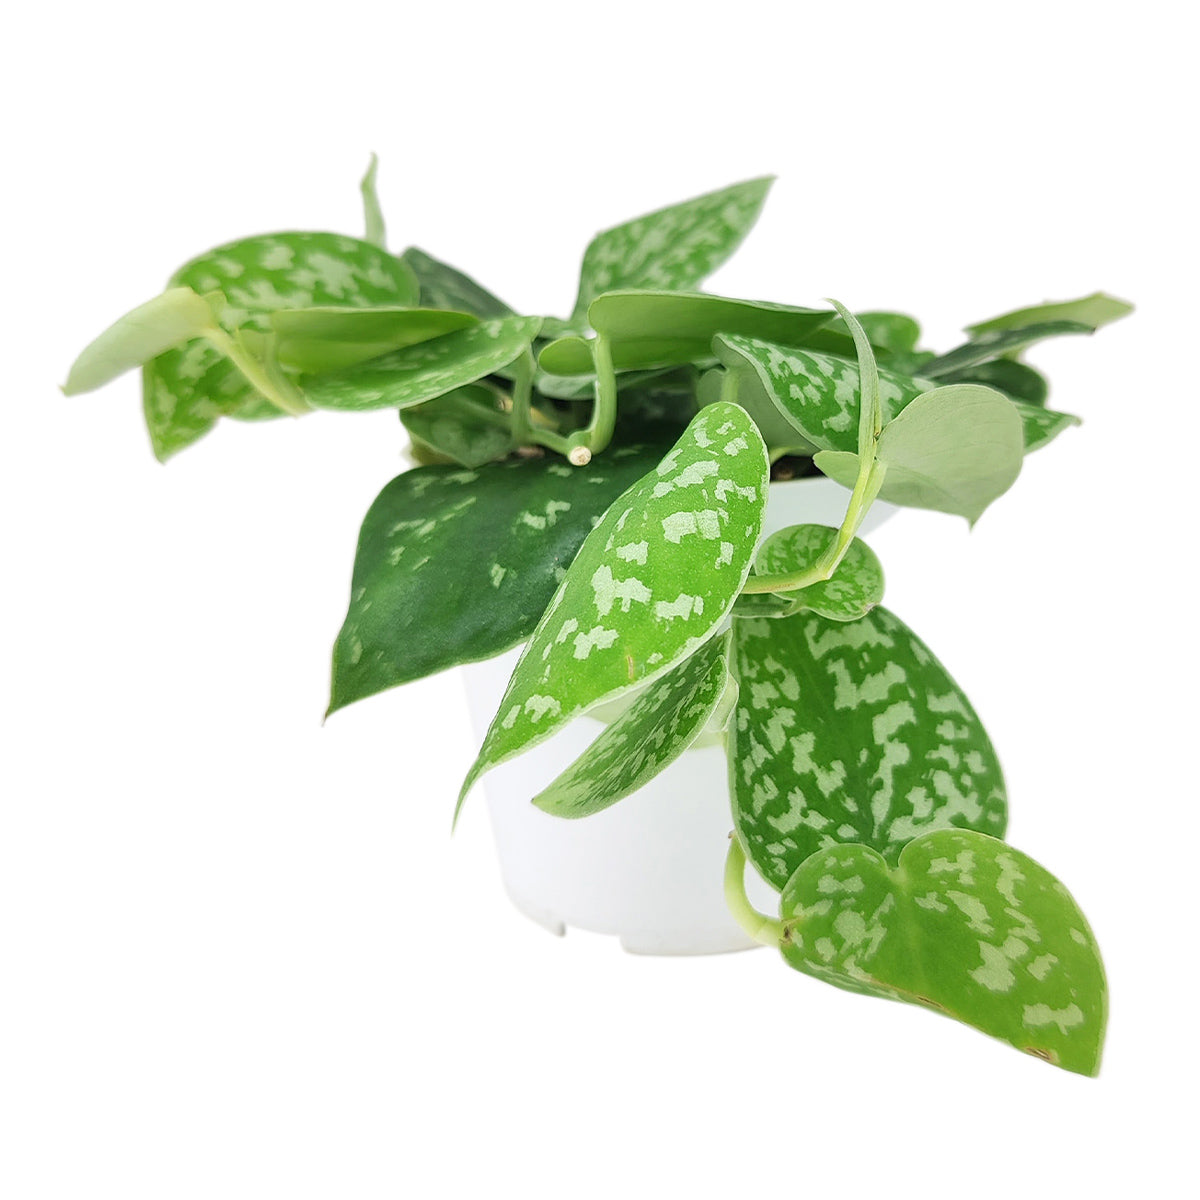  Satin Pothos Scindapsus Pictus, vining evergreen plants with variegated foliage, easy to care for houseplant for beginner, heart-shaped pothos, plants for hanging baskets and tall planters